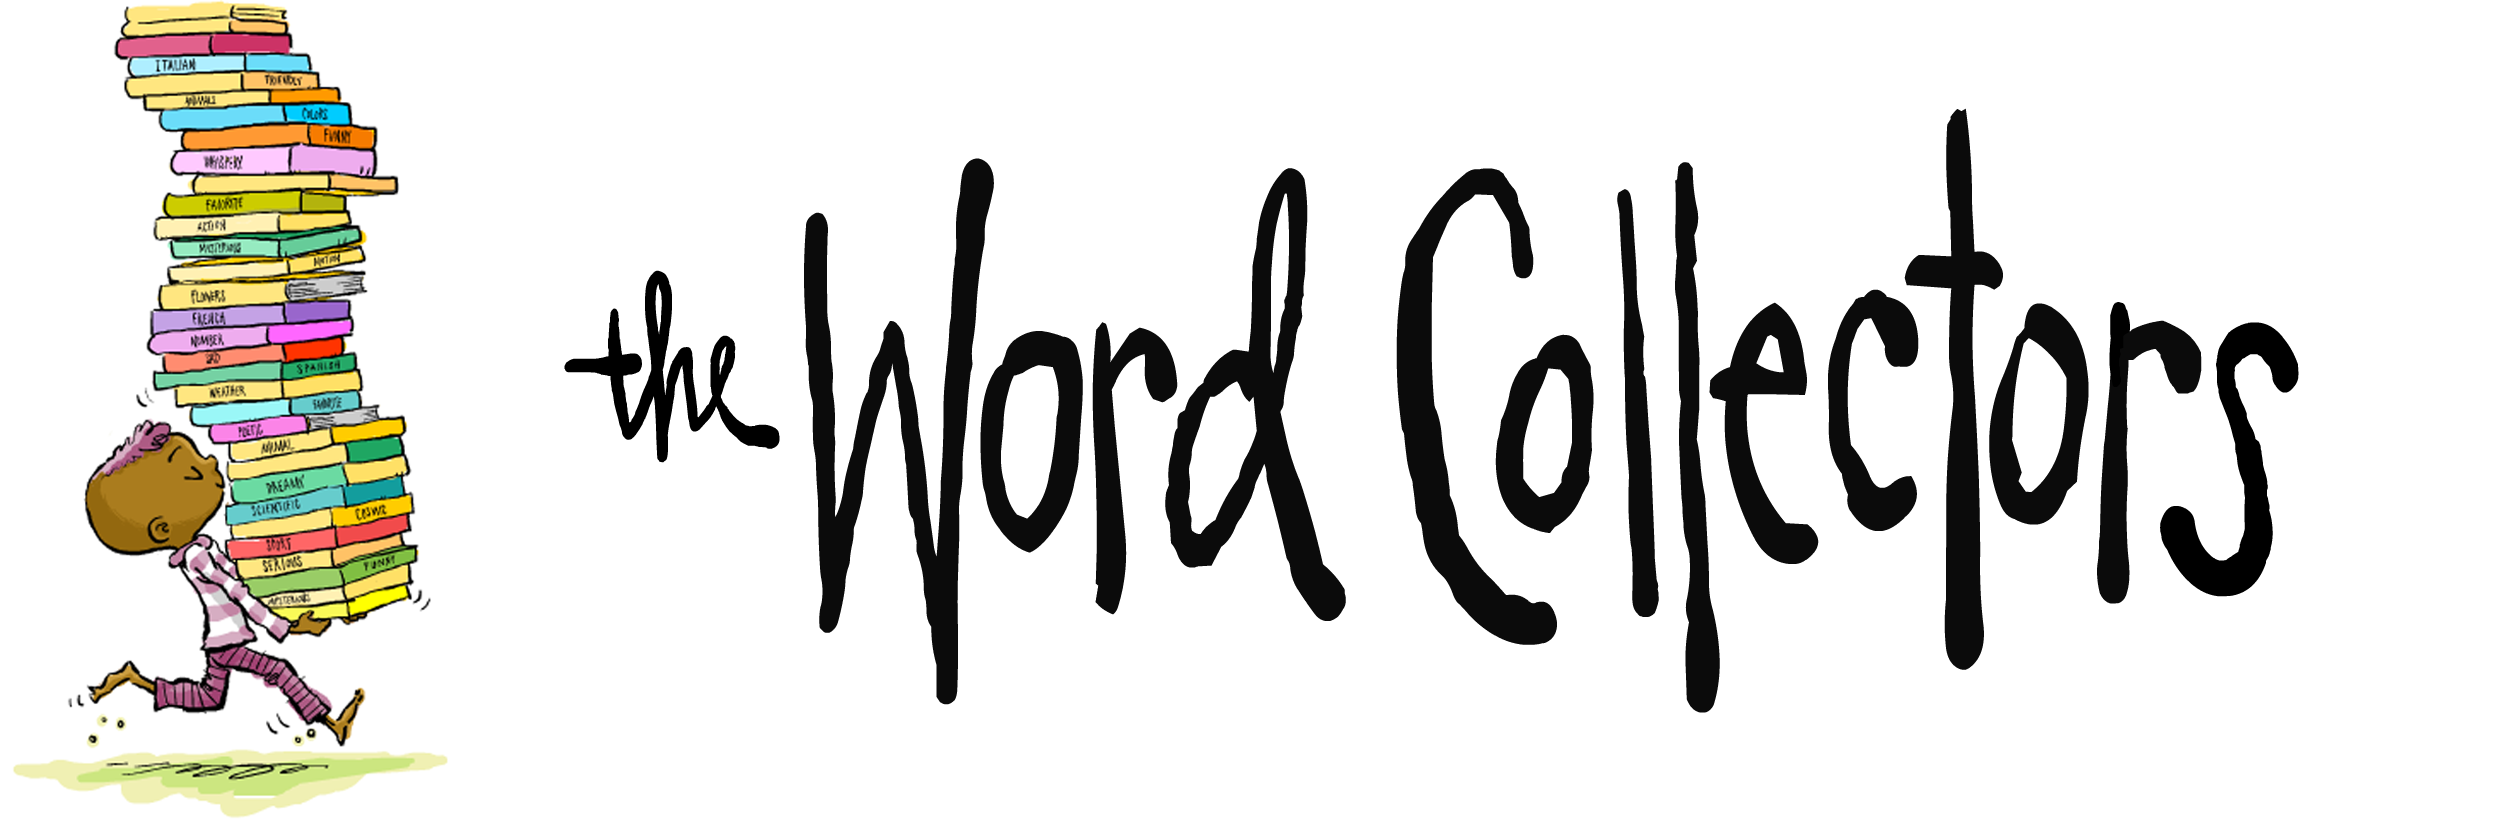 The Word Collectors